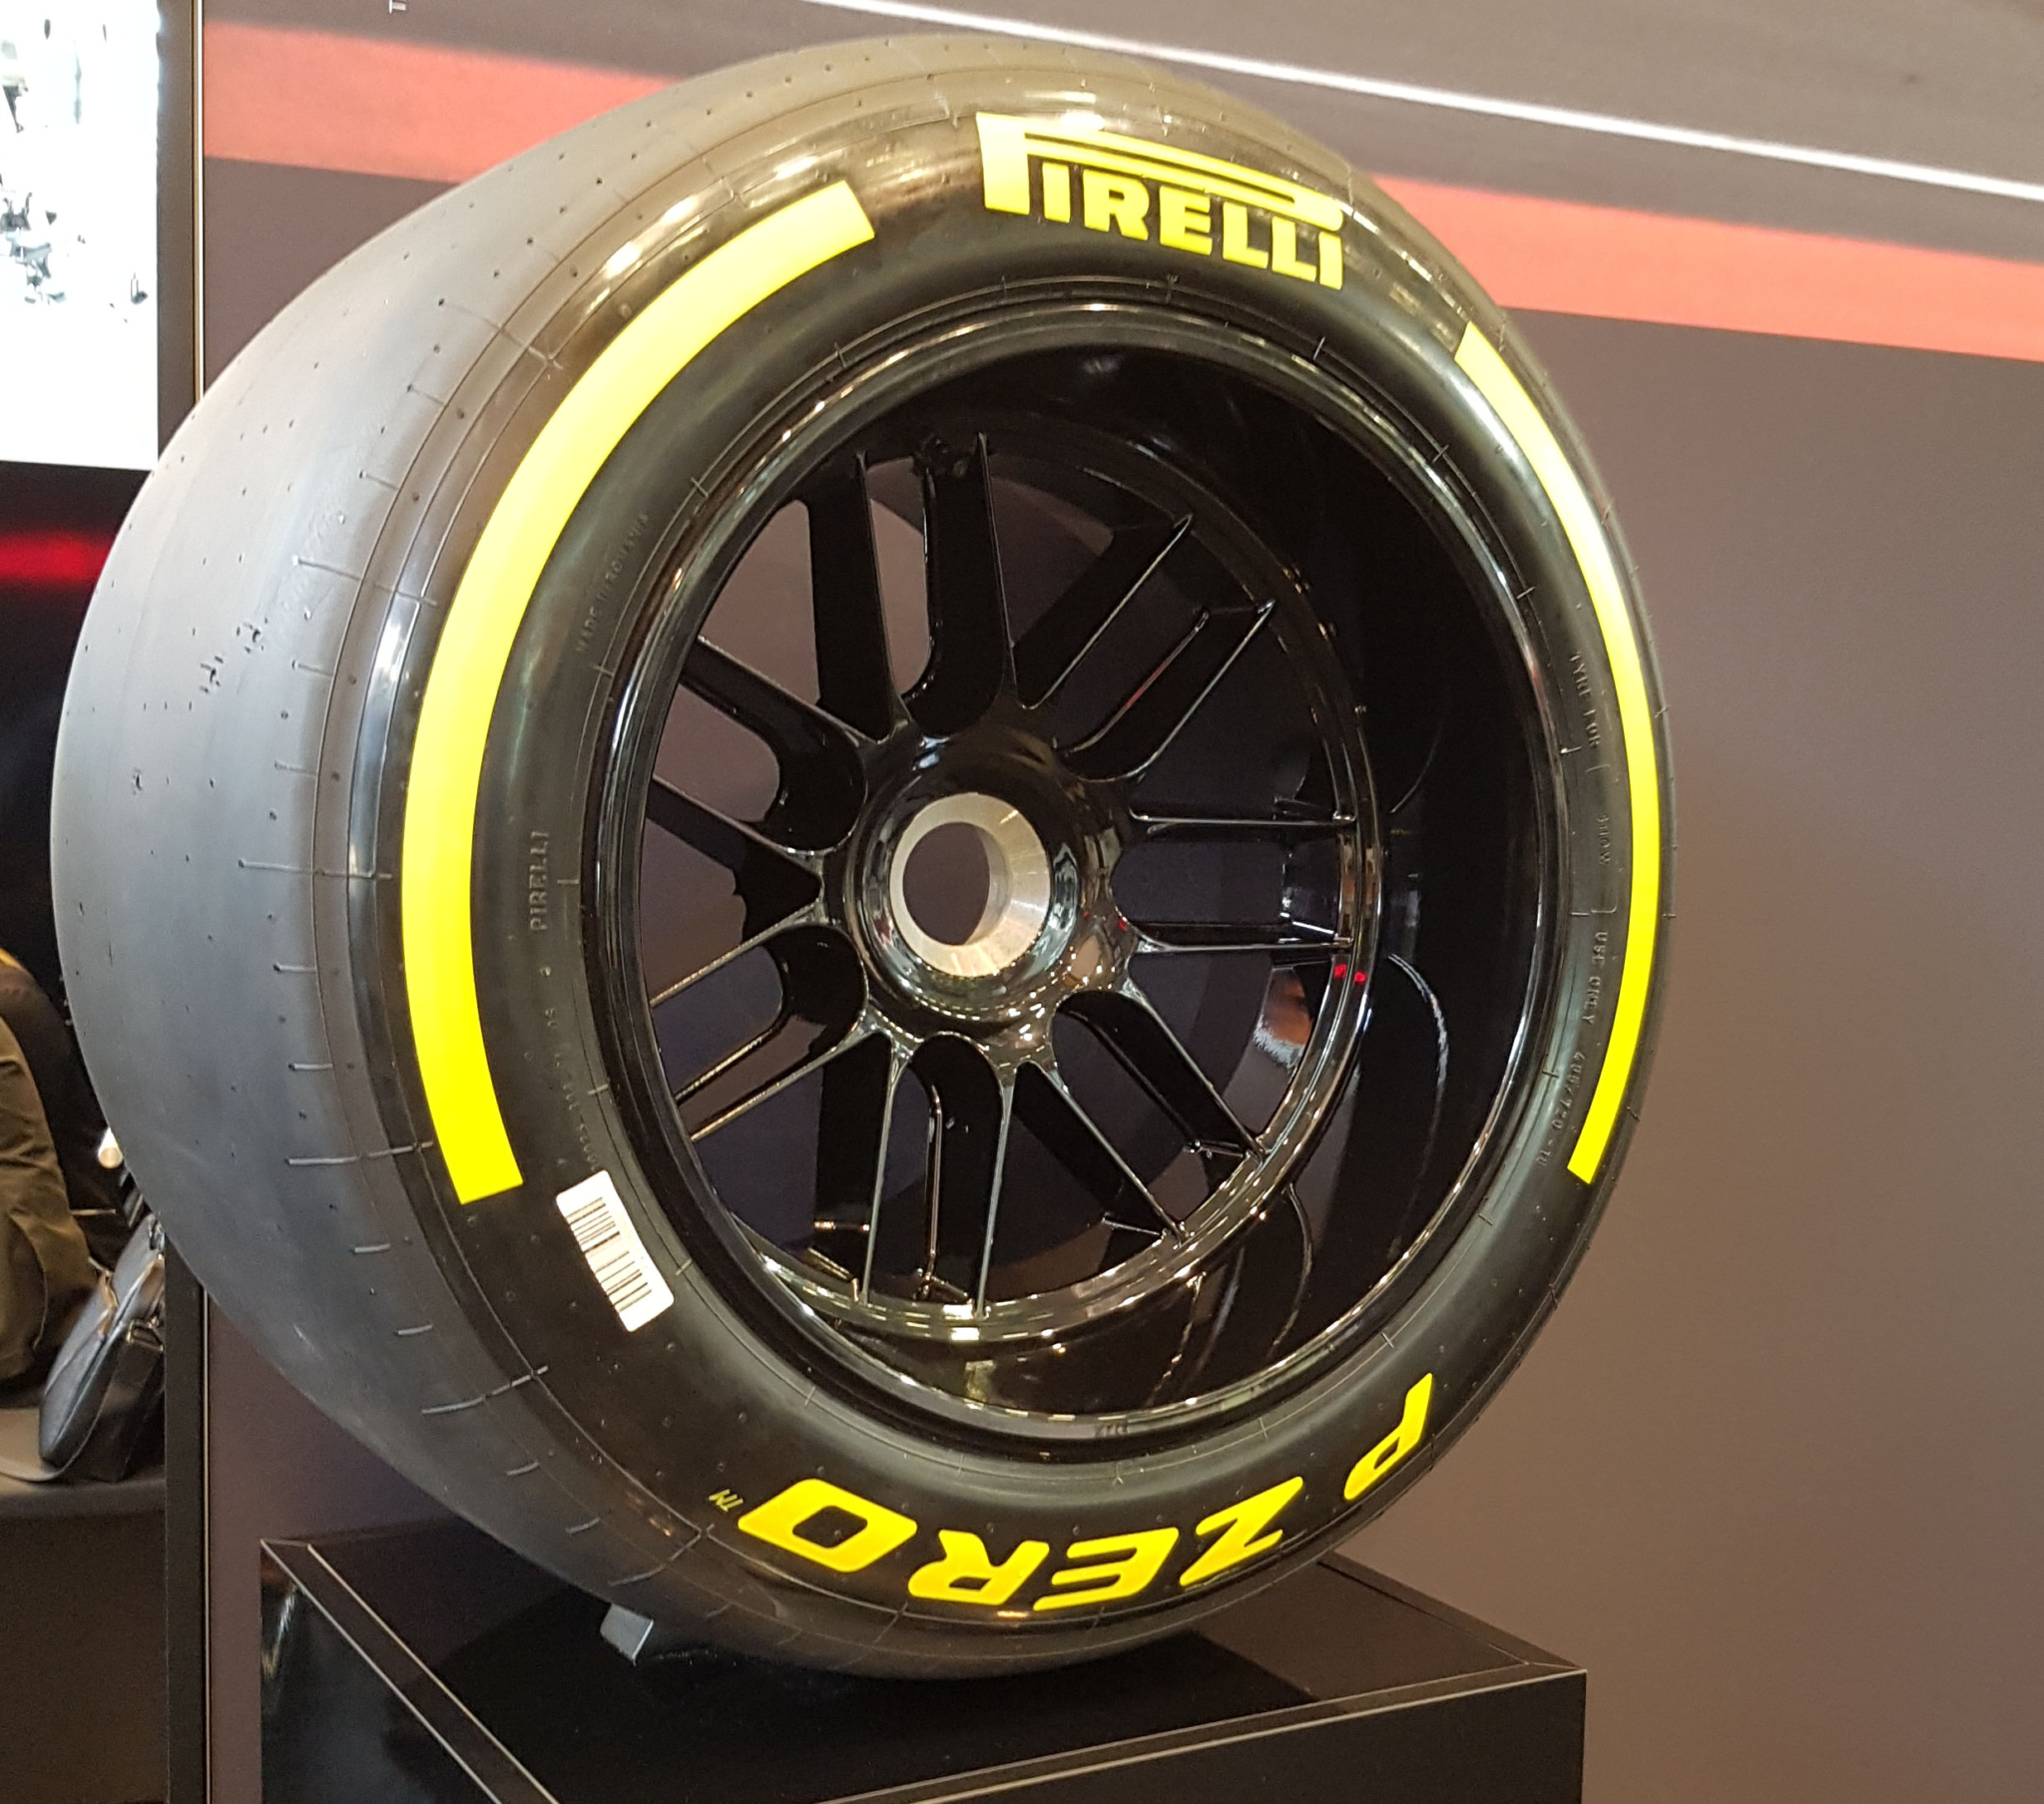 Pirelli confirmed as F1 tyre supplier until at least 2027